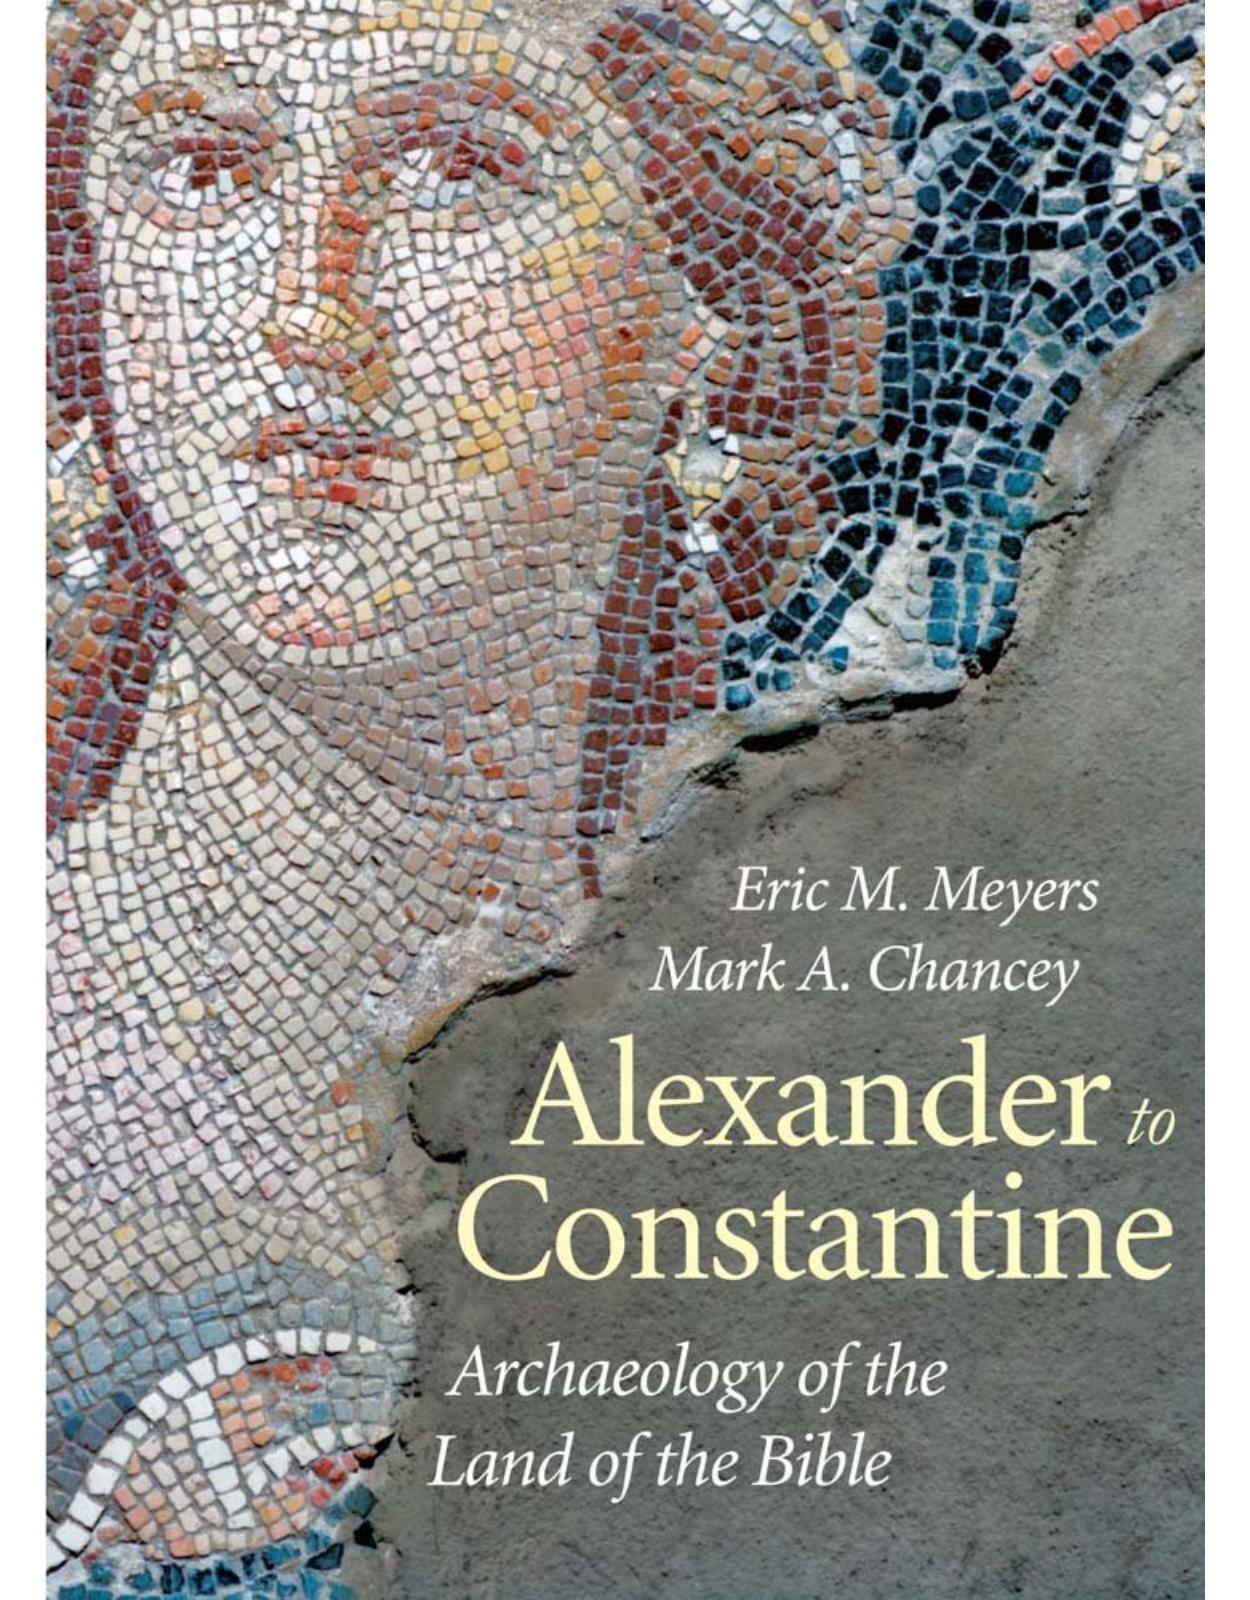 Alexander to Constantine. Archaeology of the Land of the Bible